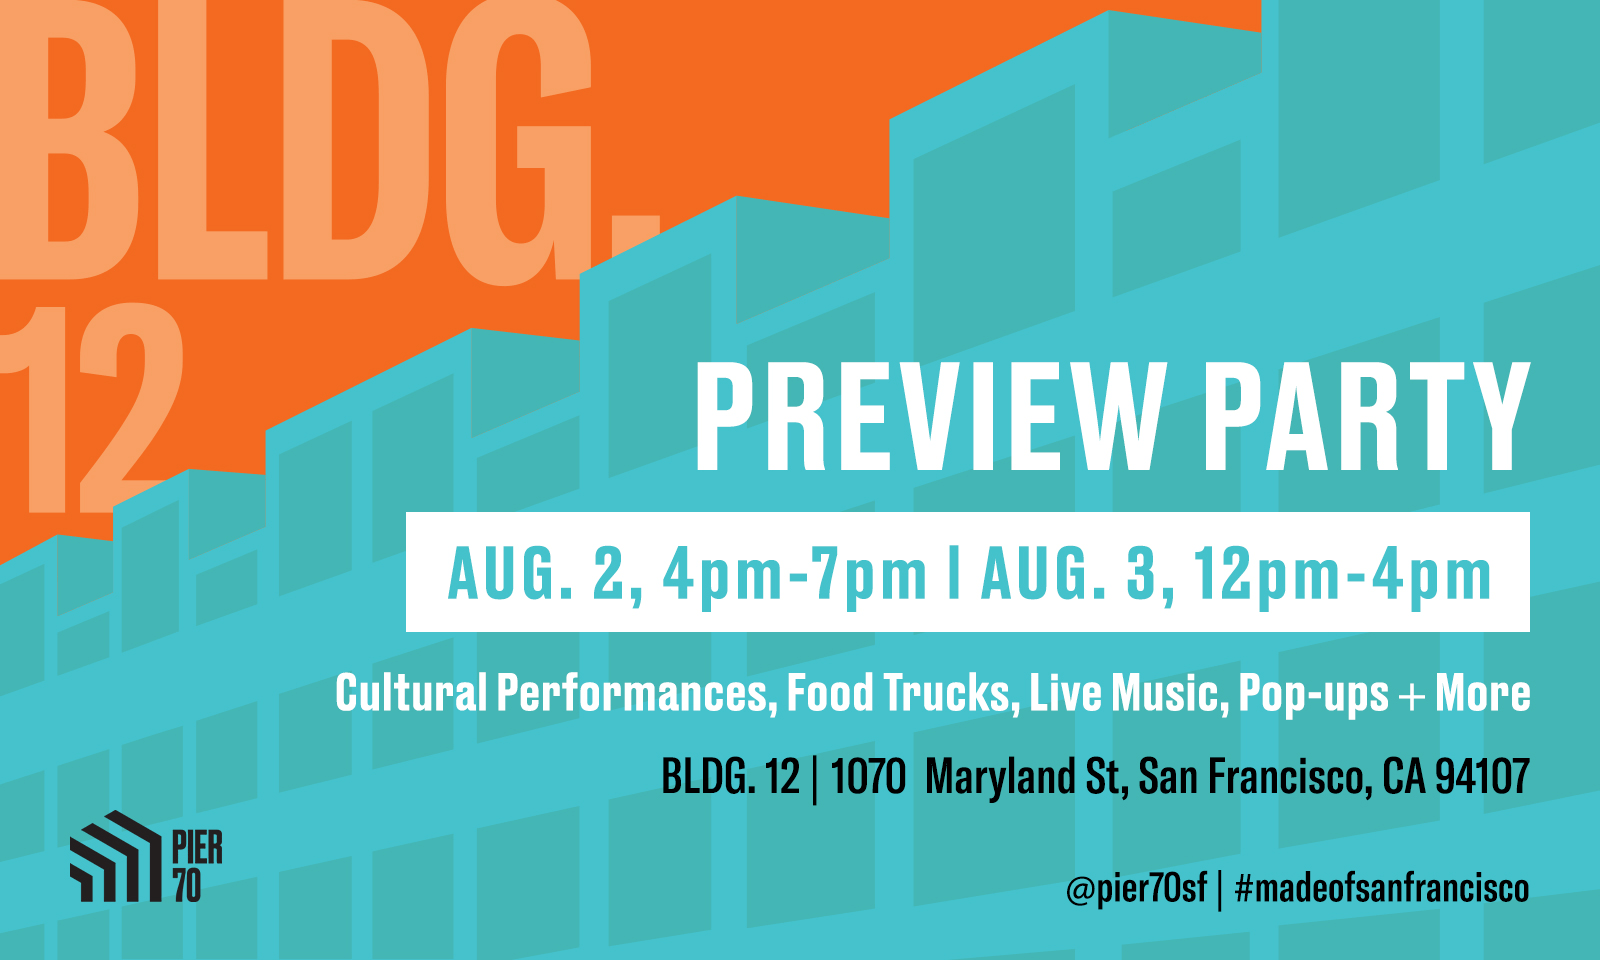 Building 12 Preview Party - Cultural performance, food trucks, live music, pop-up and more